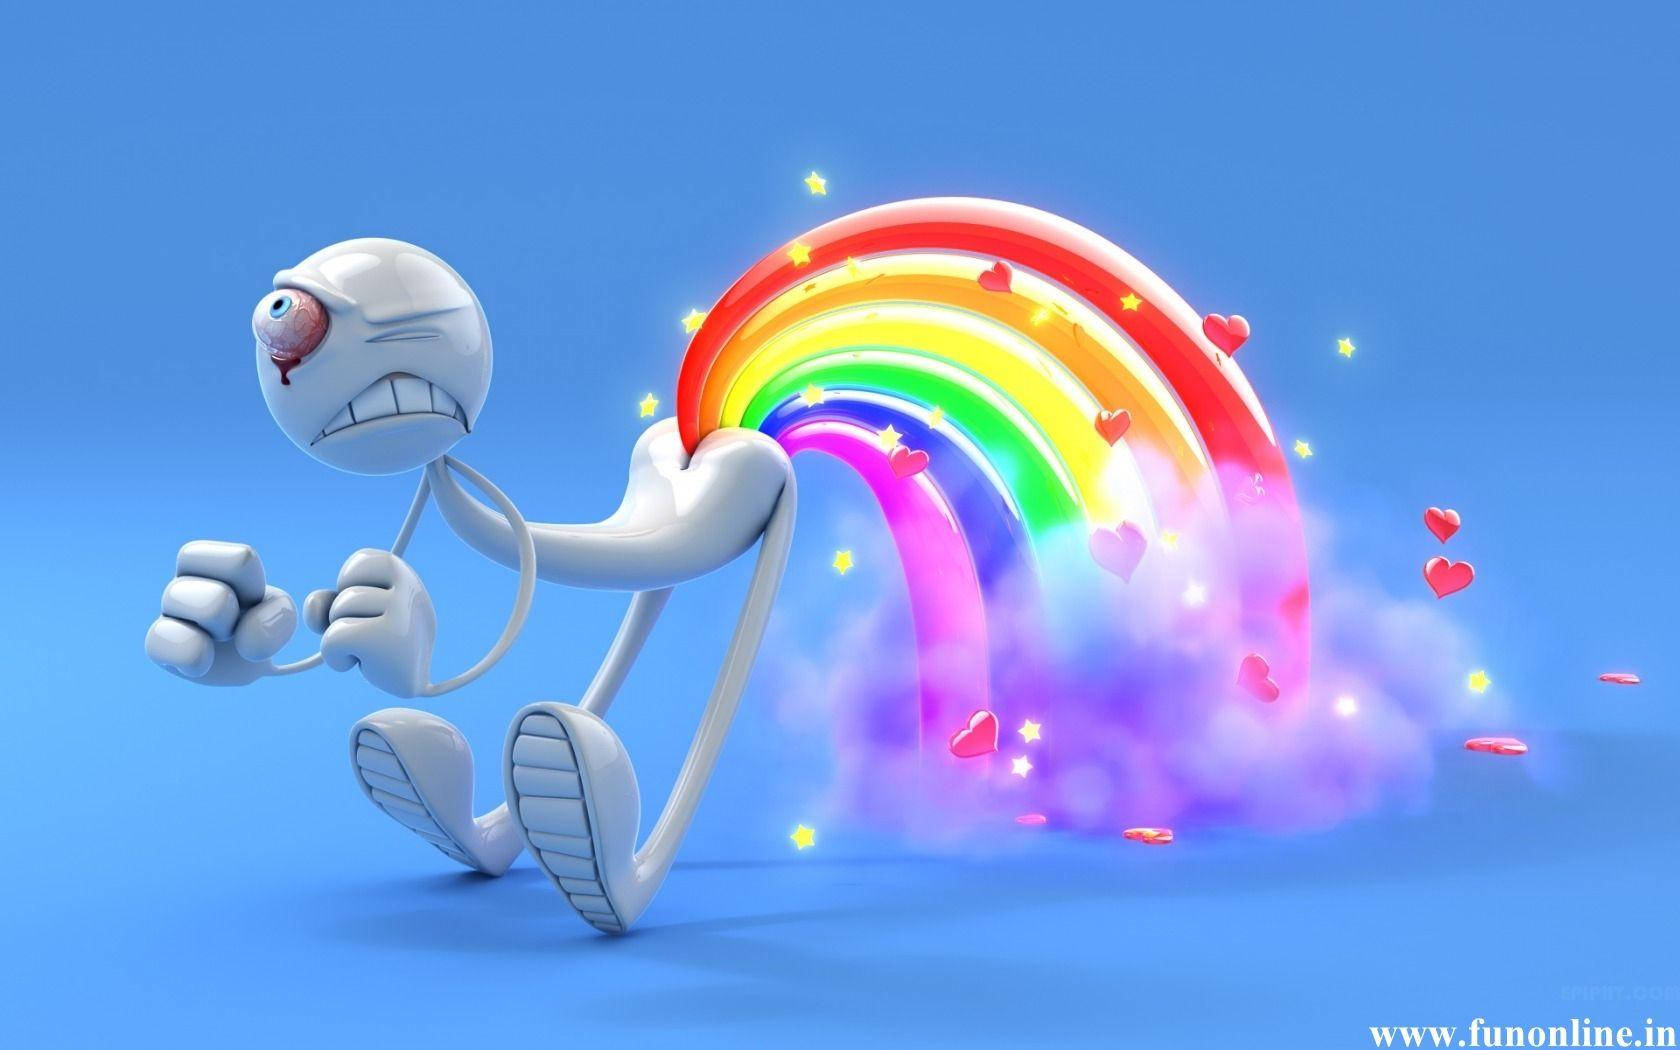 "The hilarious life of a man farting rainbows in a cartoon world." Wallpaper